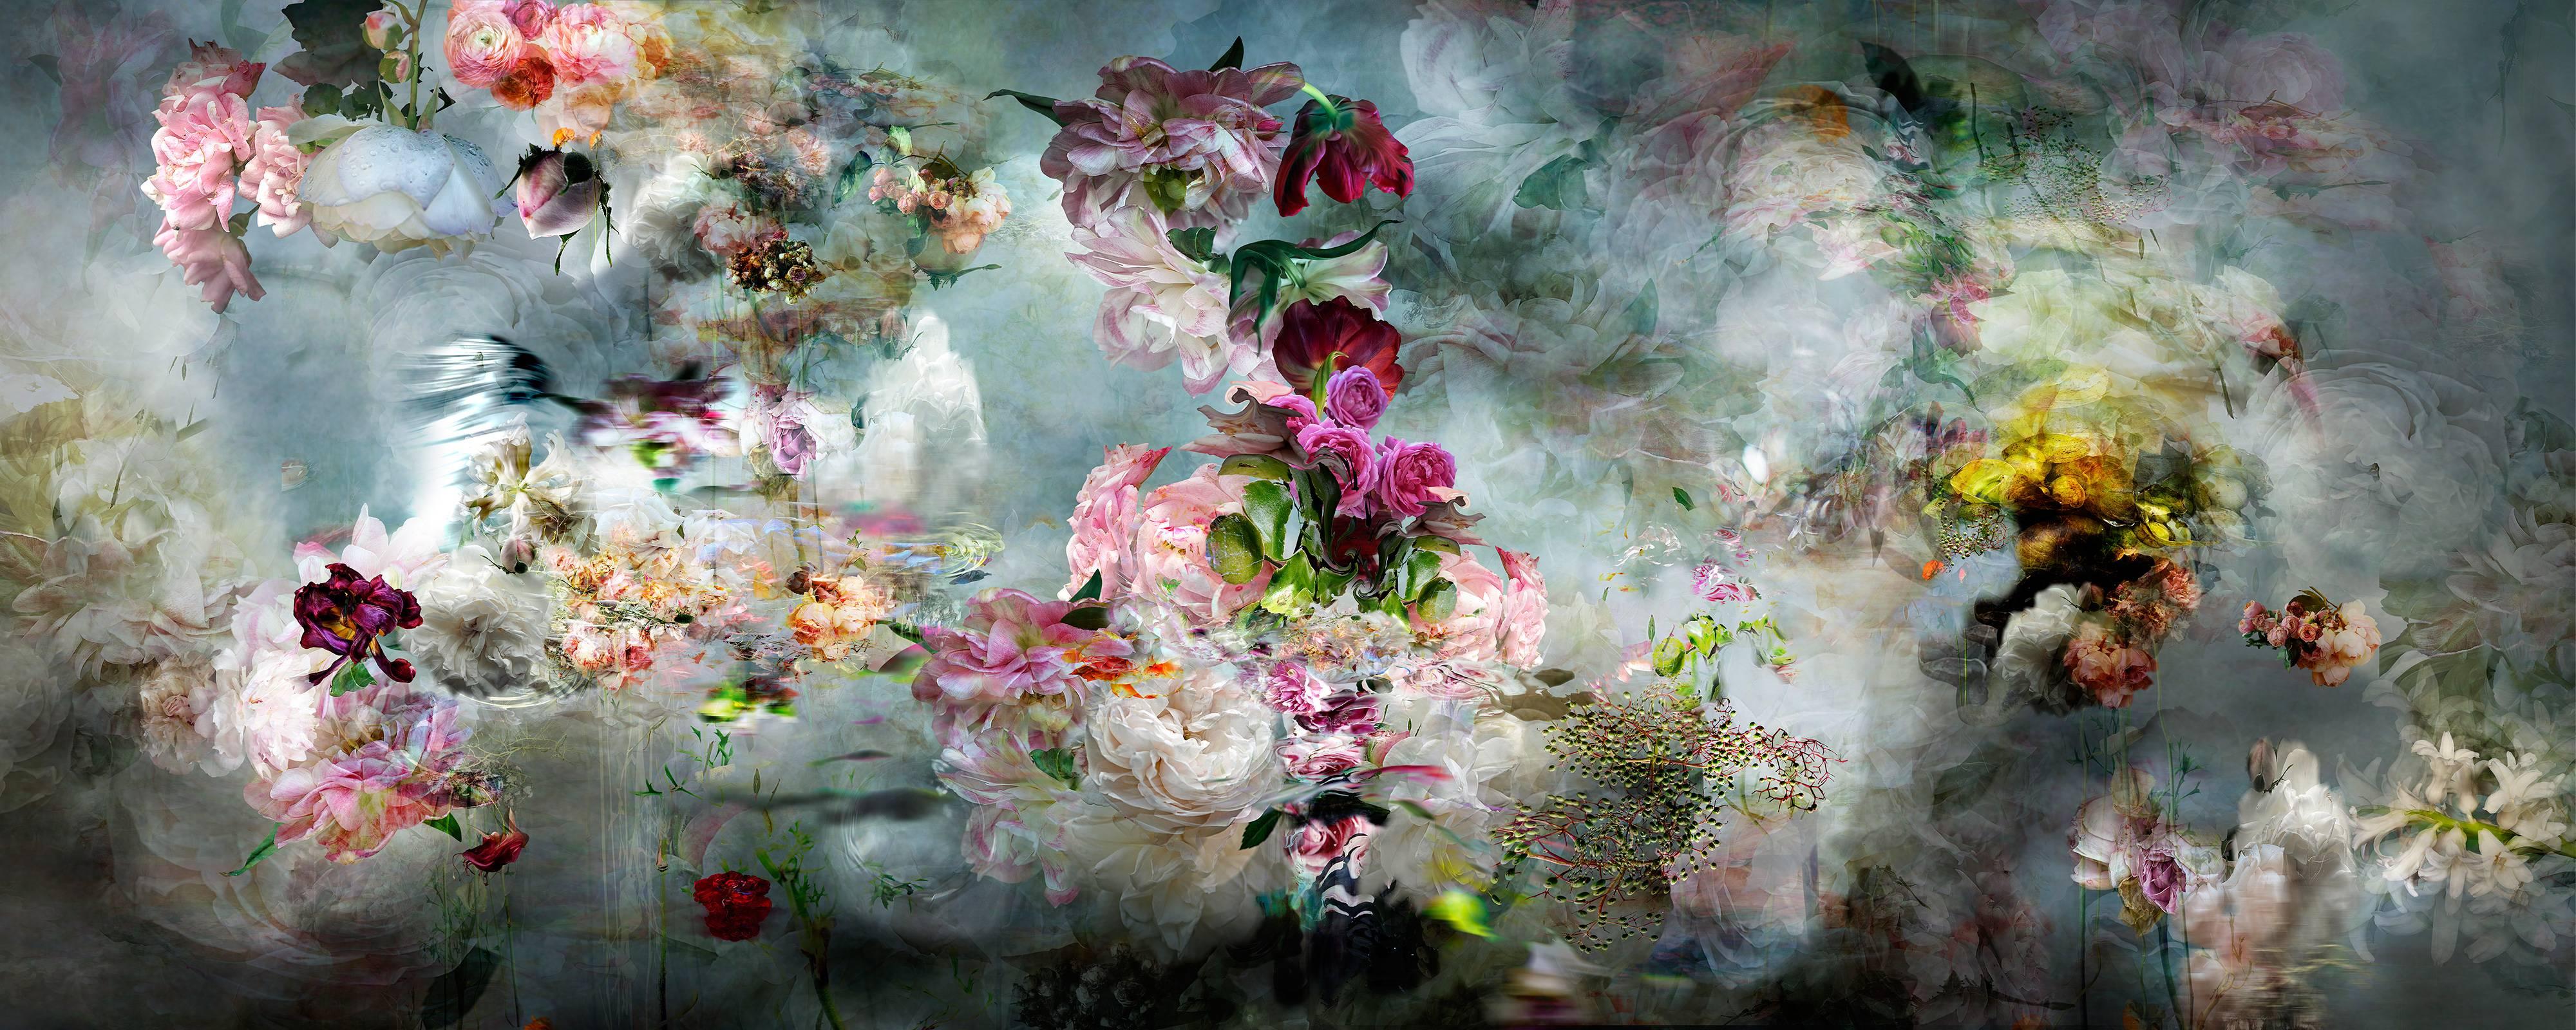 Isabelle Menin Abstract Photograph - Song for dead heroes #4 floral abstract landscape still life floral photo